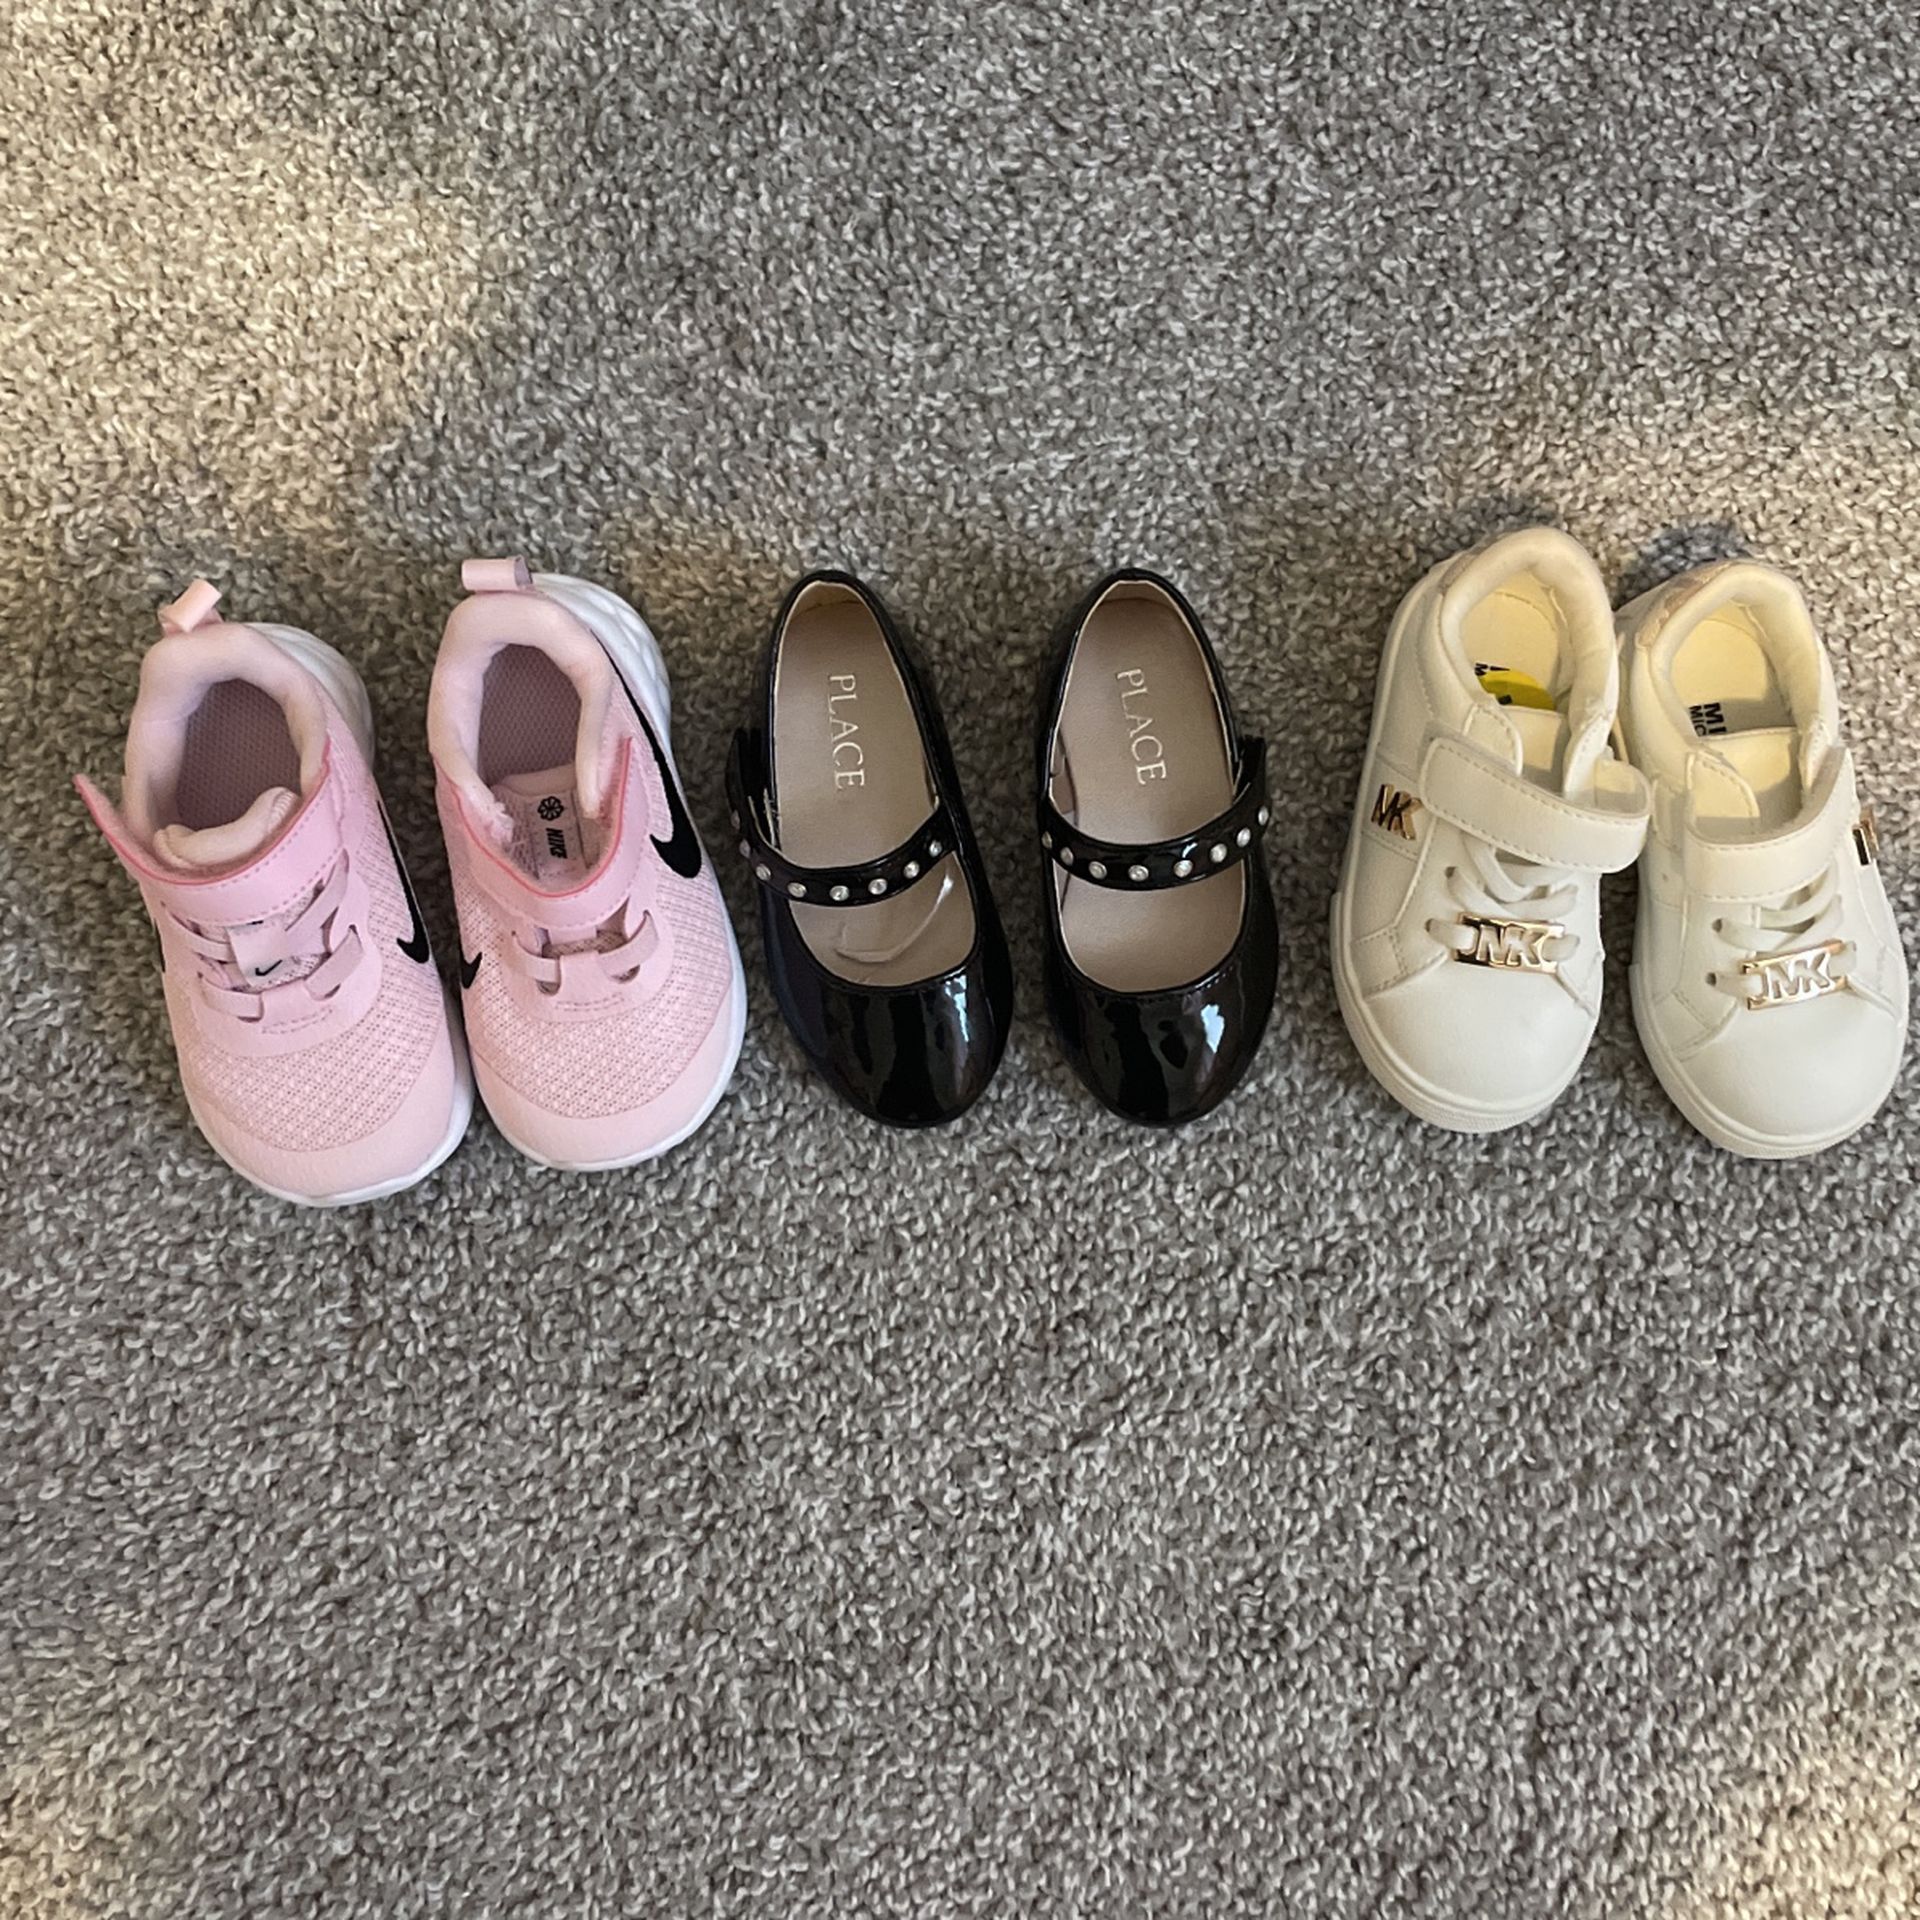 Babygirl Shoes Worn, Once Or Twice 